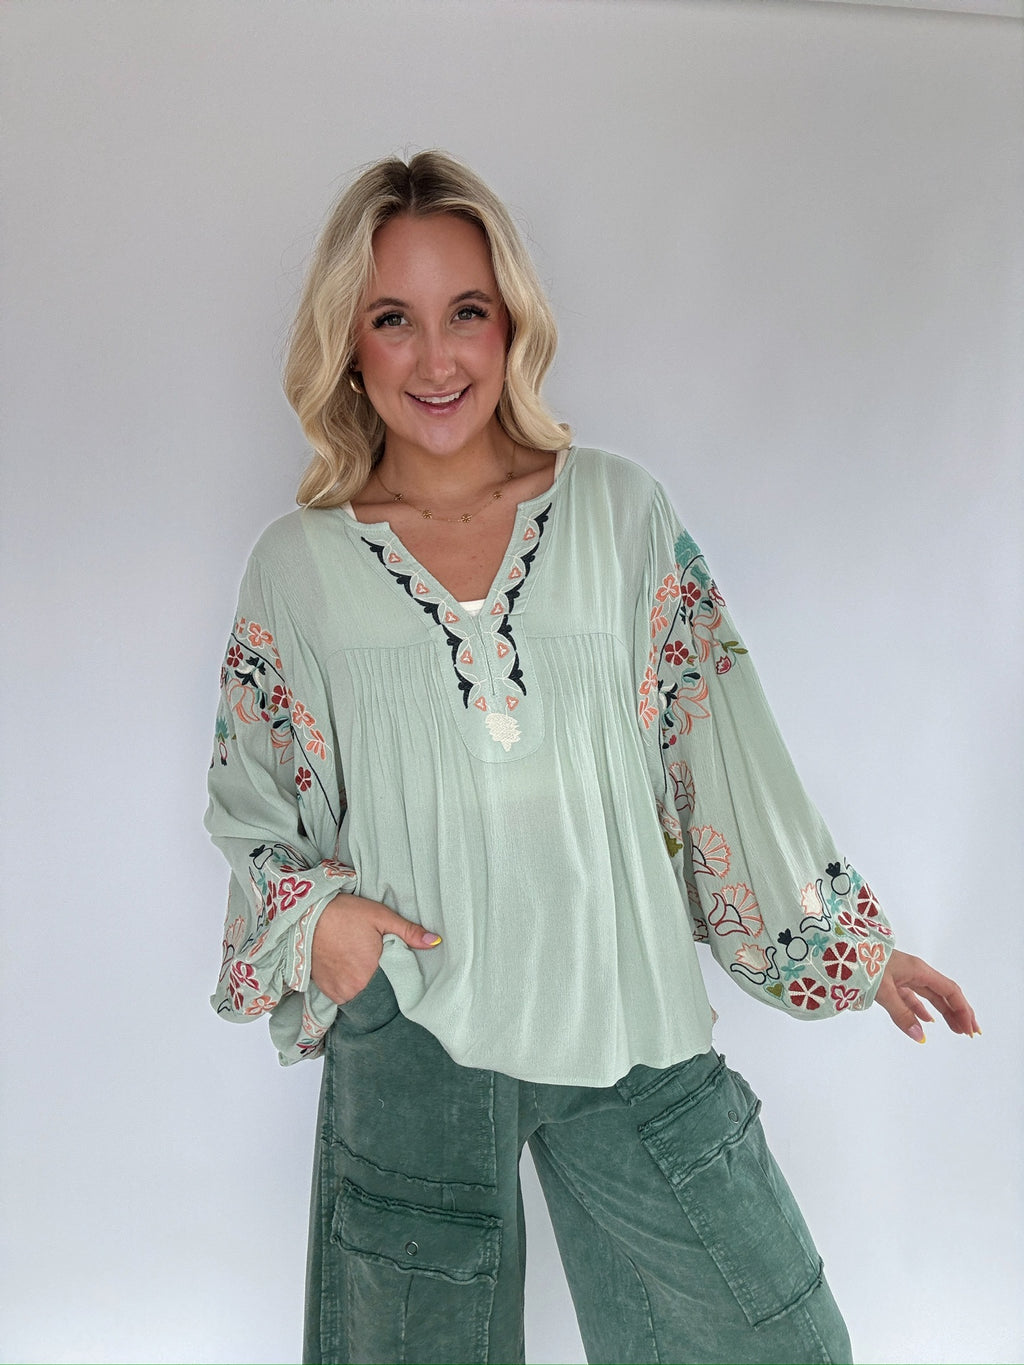 Storyline Embroidered Top - Mint Blue